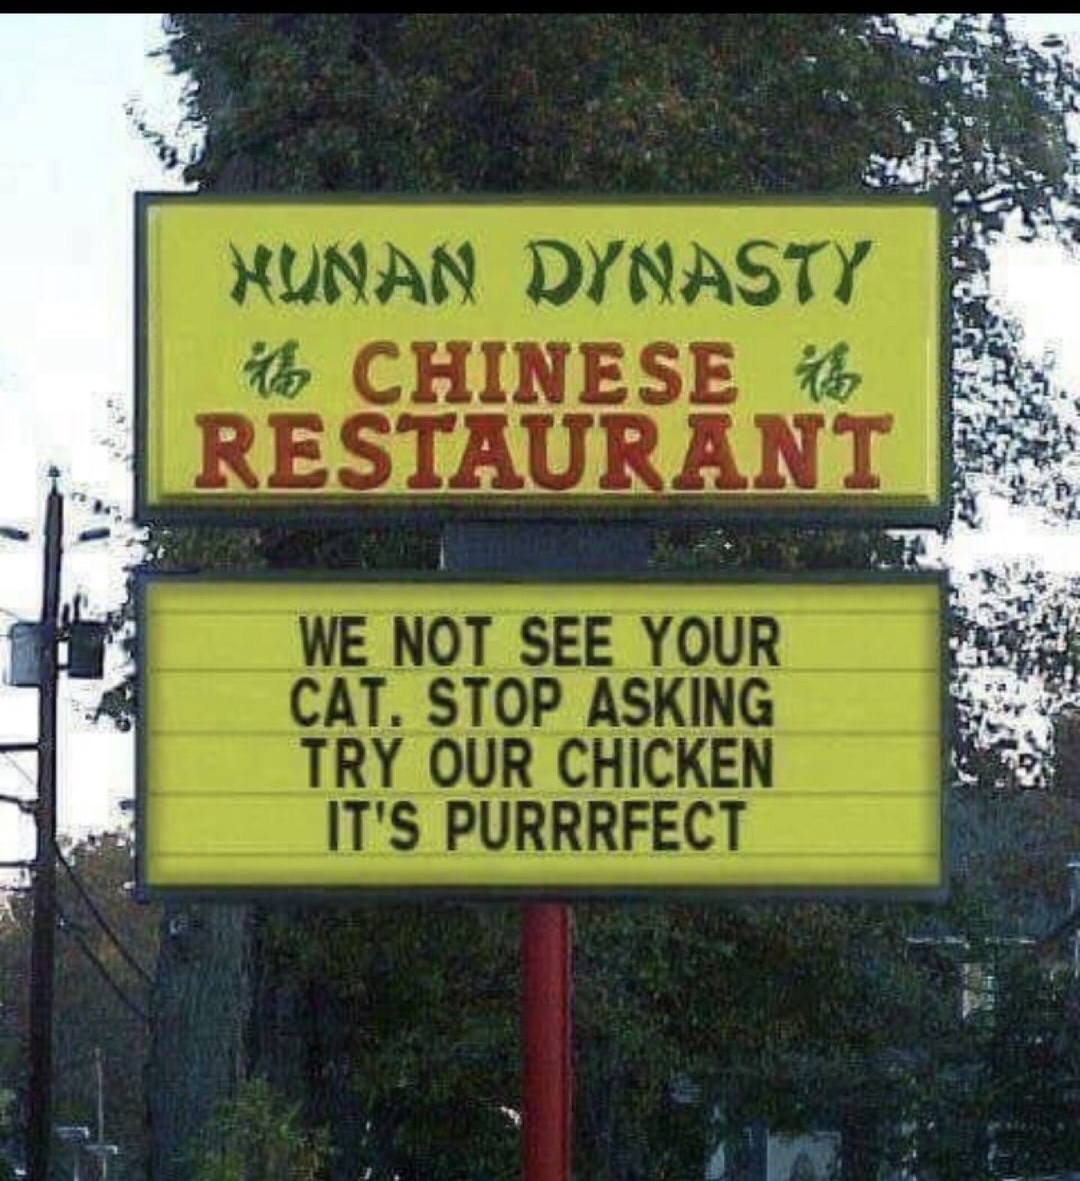 we no see your cat - Hunan Dynasty 4 Chinese Restaurant We Not See Your Cat. Stop Asking Try Our Chicken It'S Purrrfect